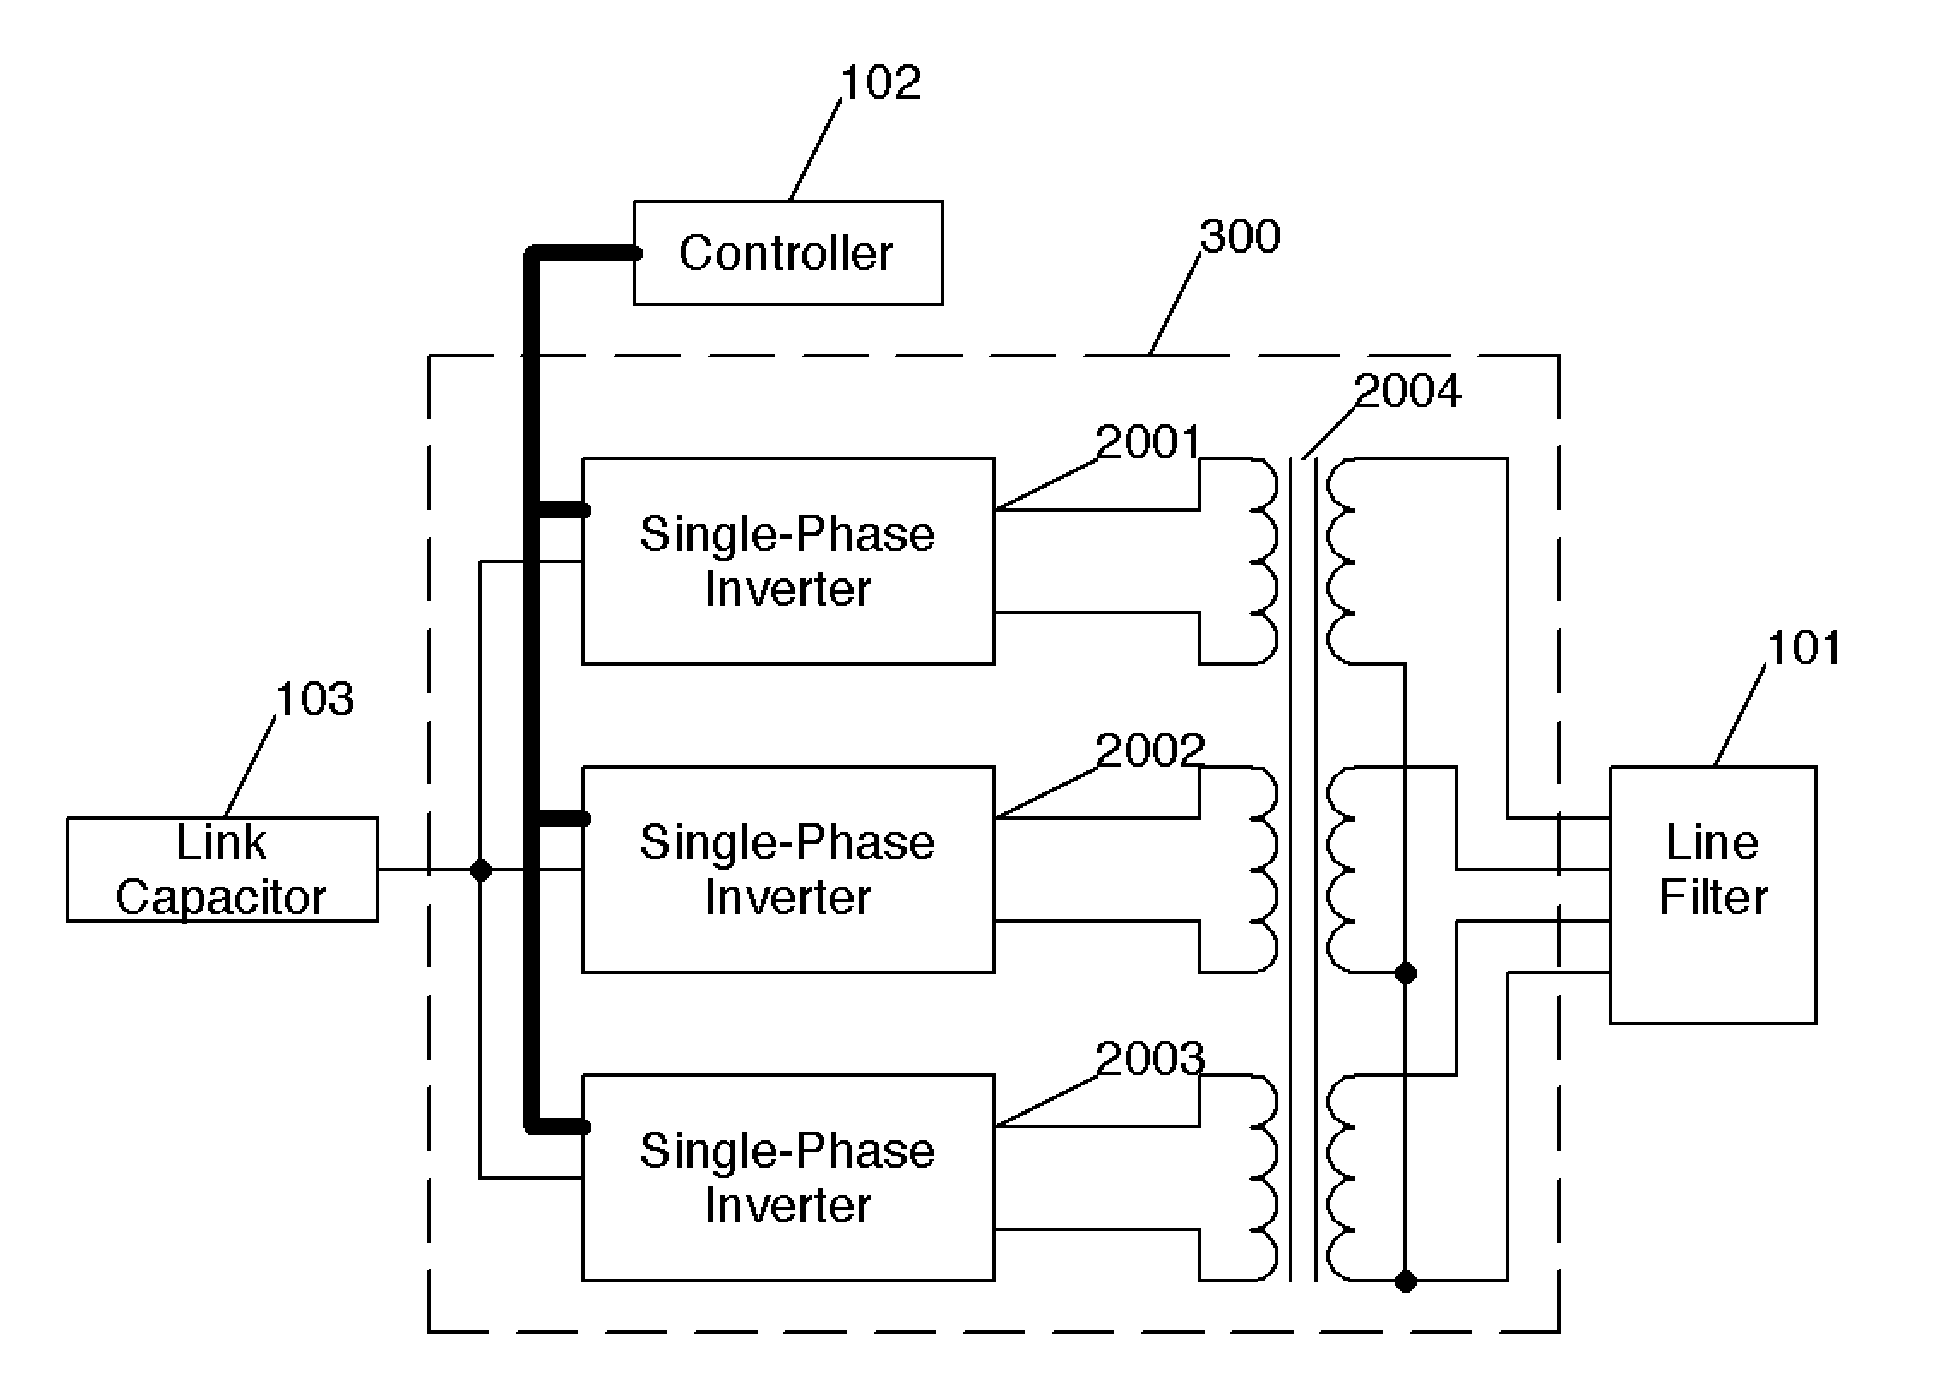 Poly-phase inverter with independent phase control